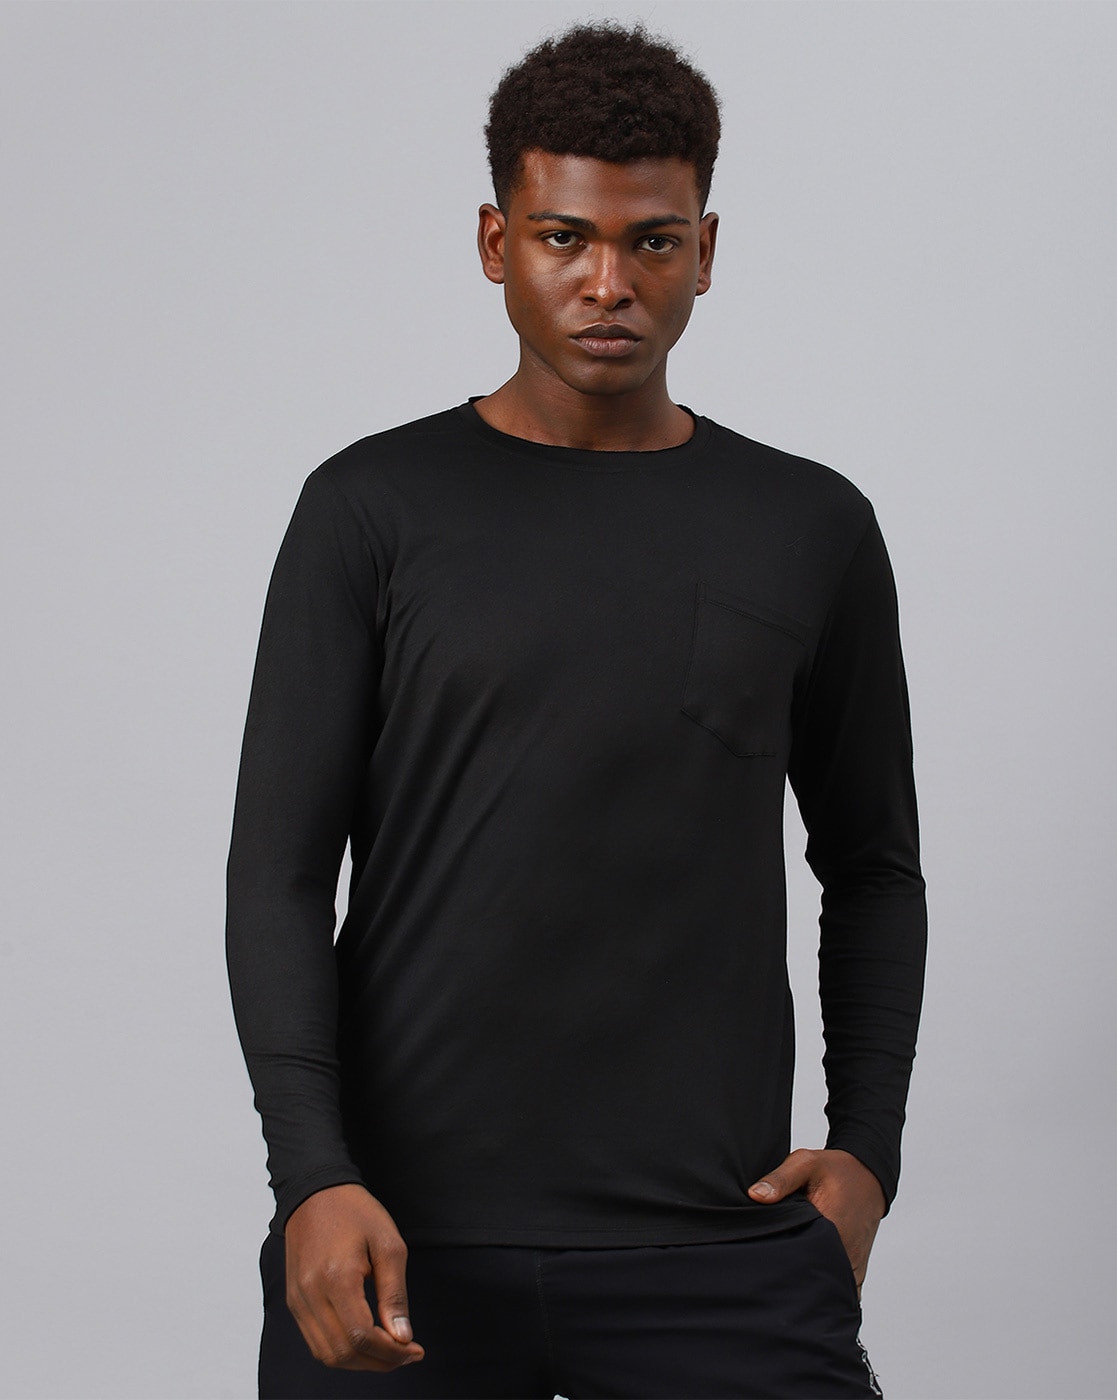 Buy Black Tshirts for Women by FITKIN Online